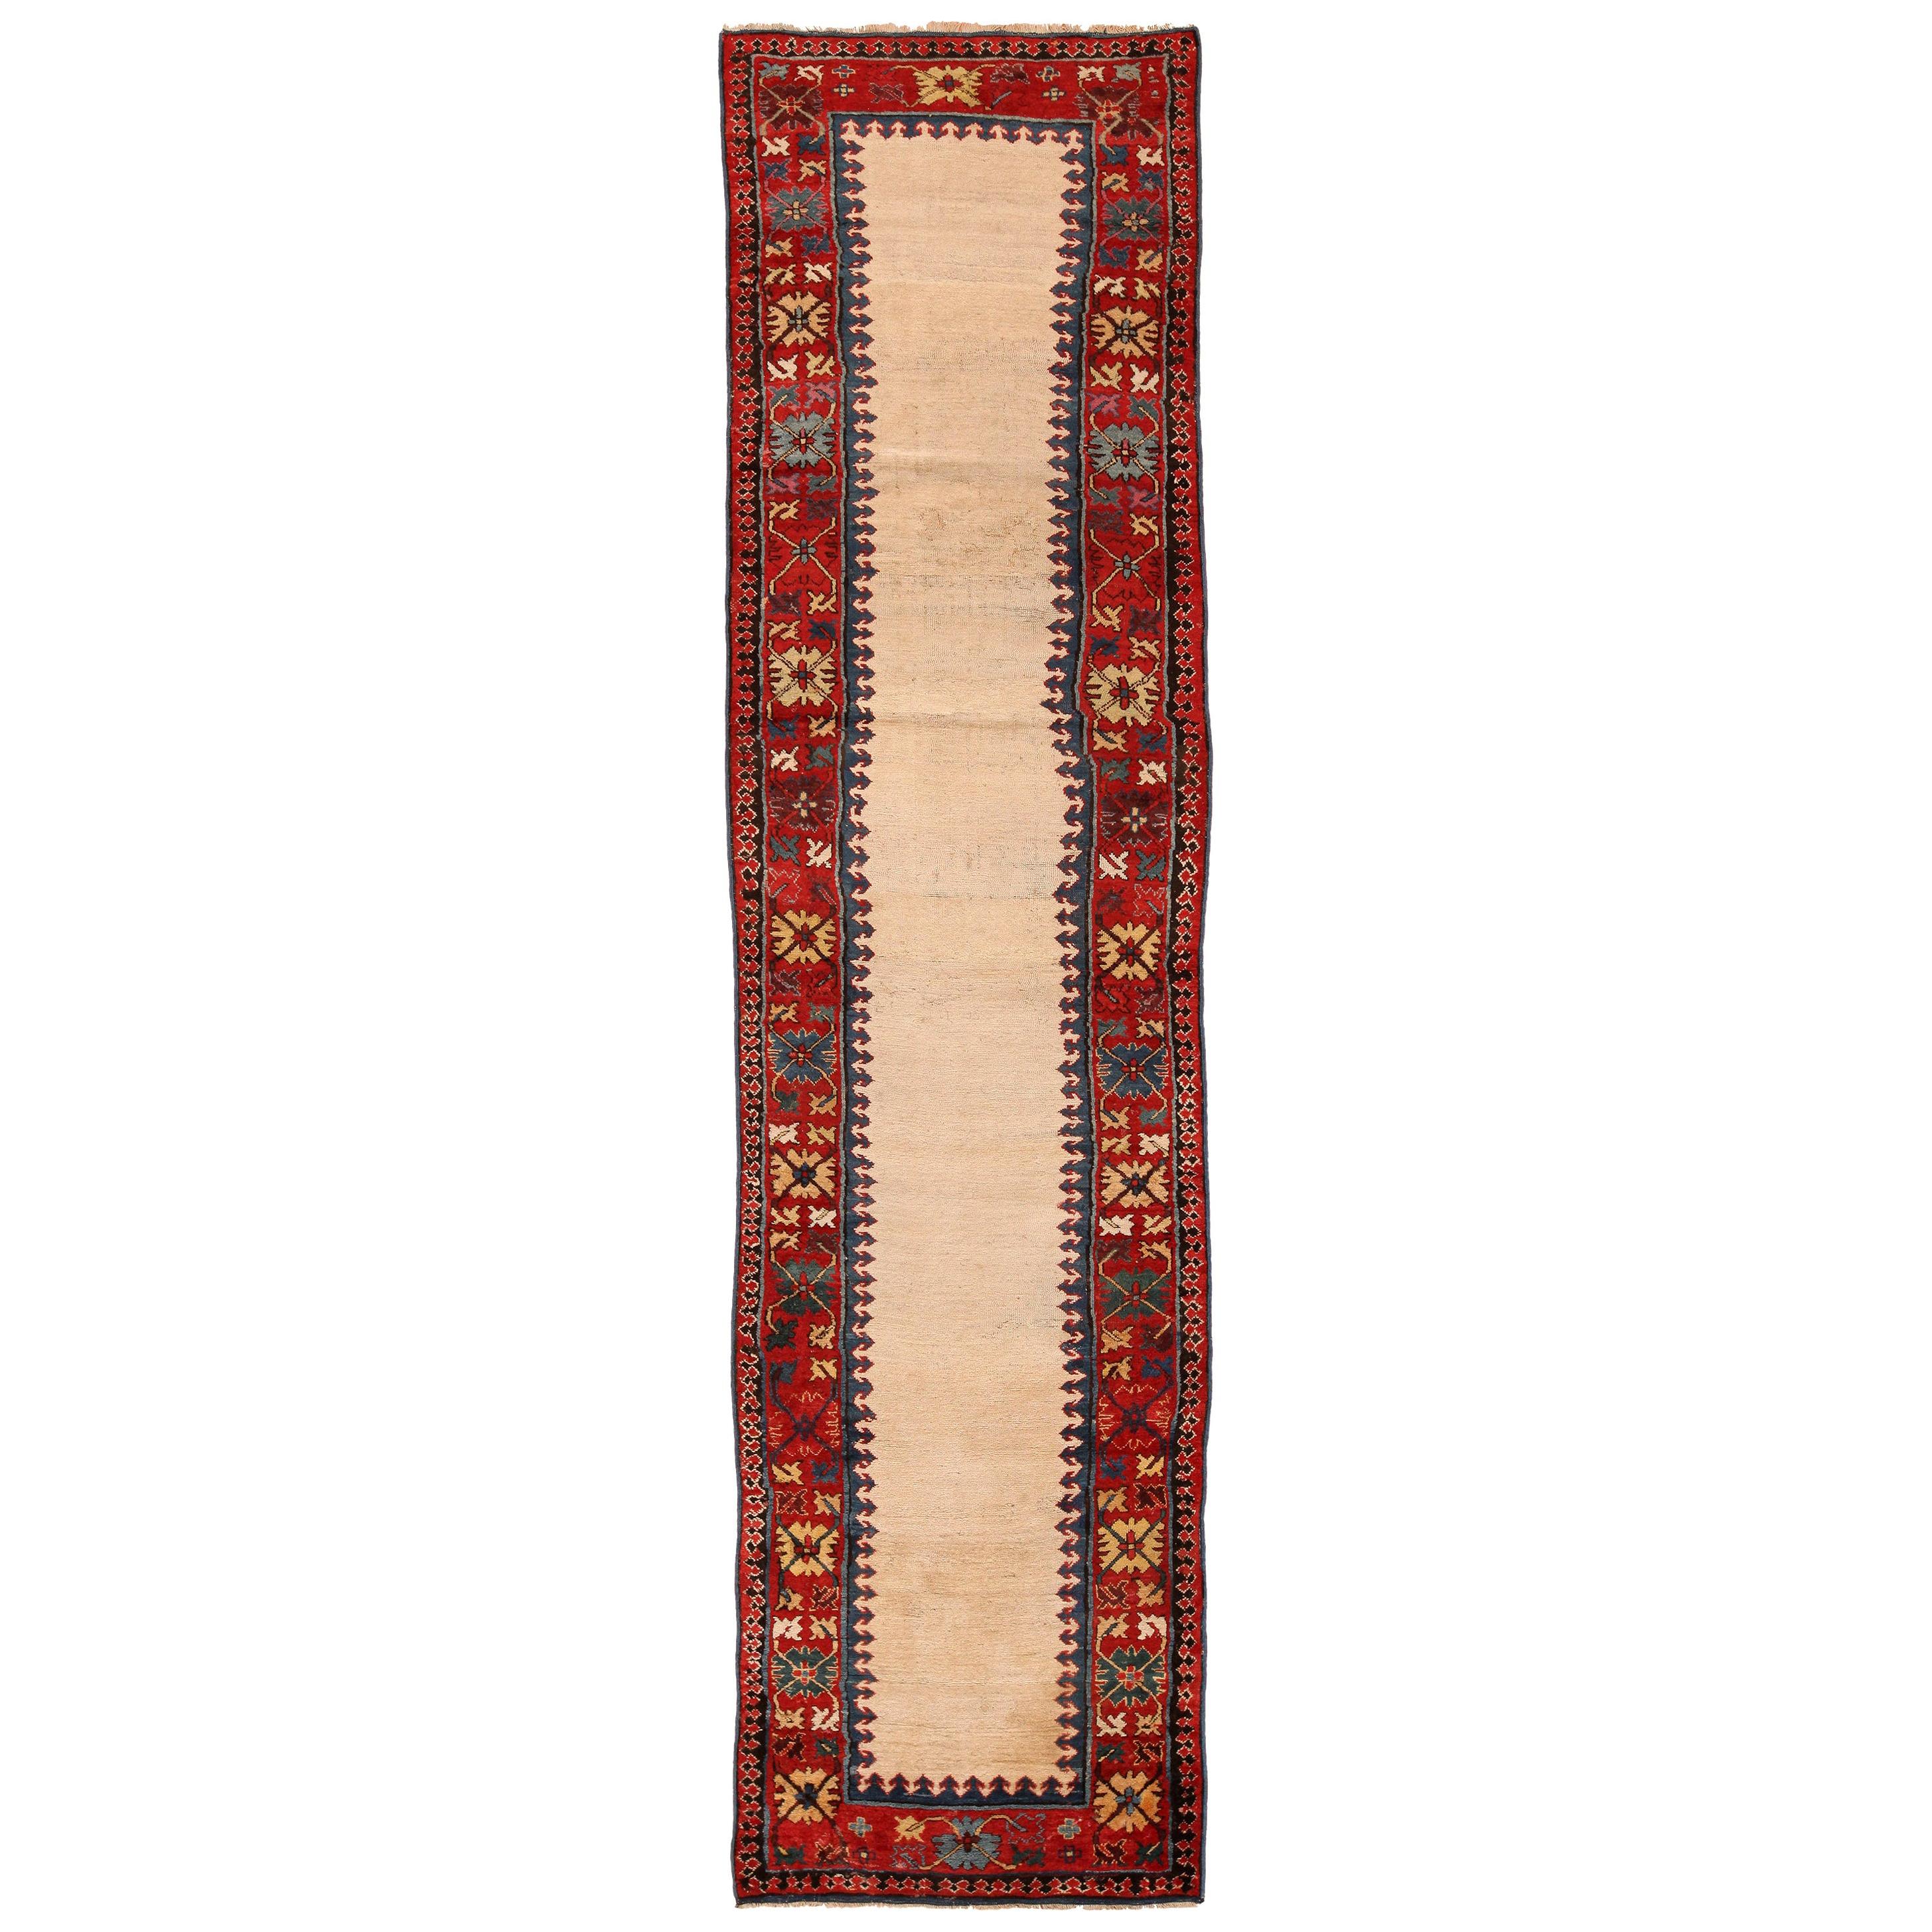 Nazmiyal Collection Antique Caucasian Moghan Runner Rug. Size: 3' 1" x 12' 7" 